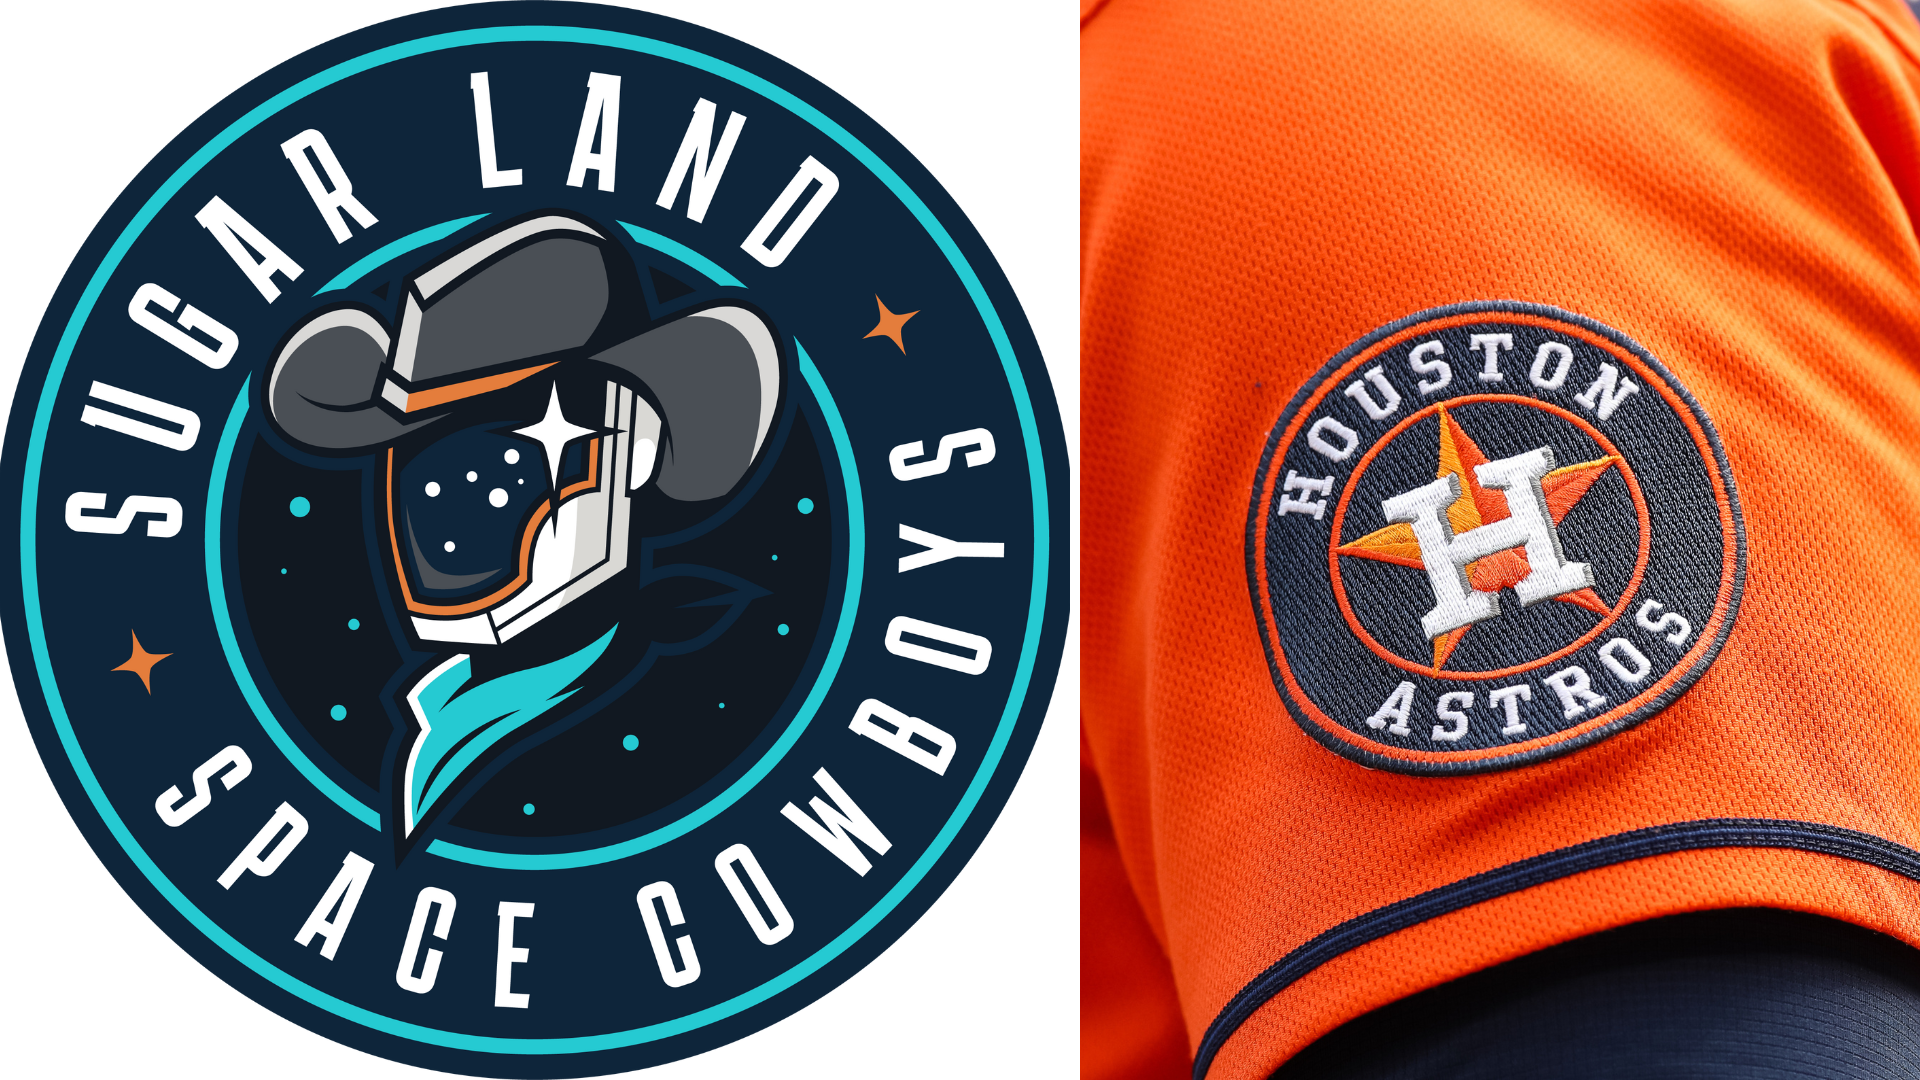 Astros to play exhibition games vs. Space Cowboys as part of 2023